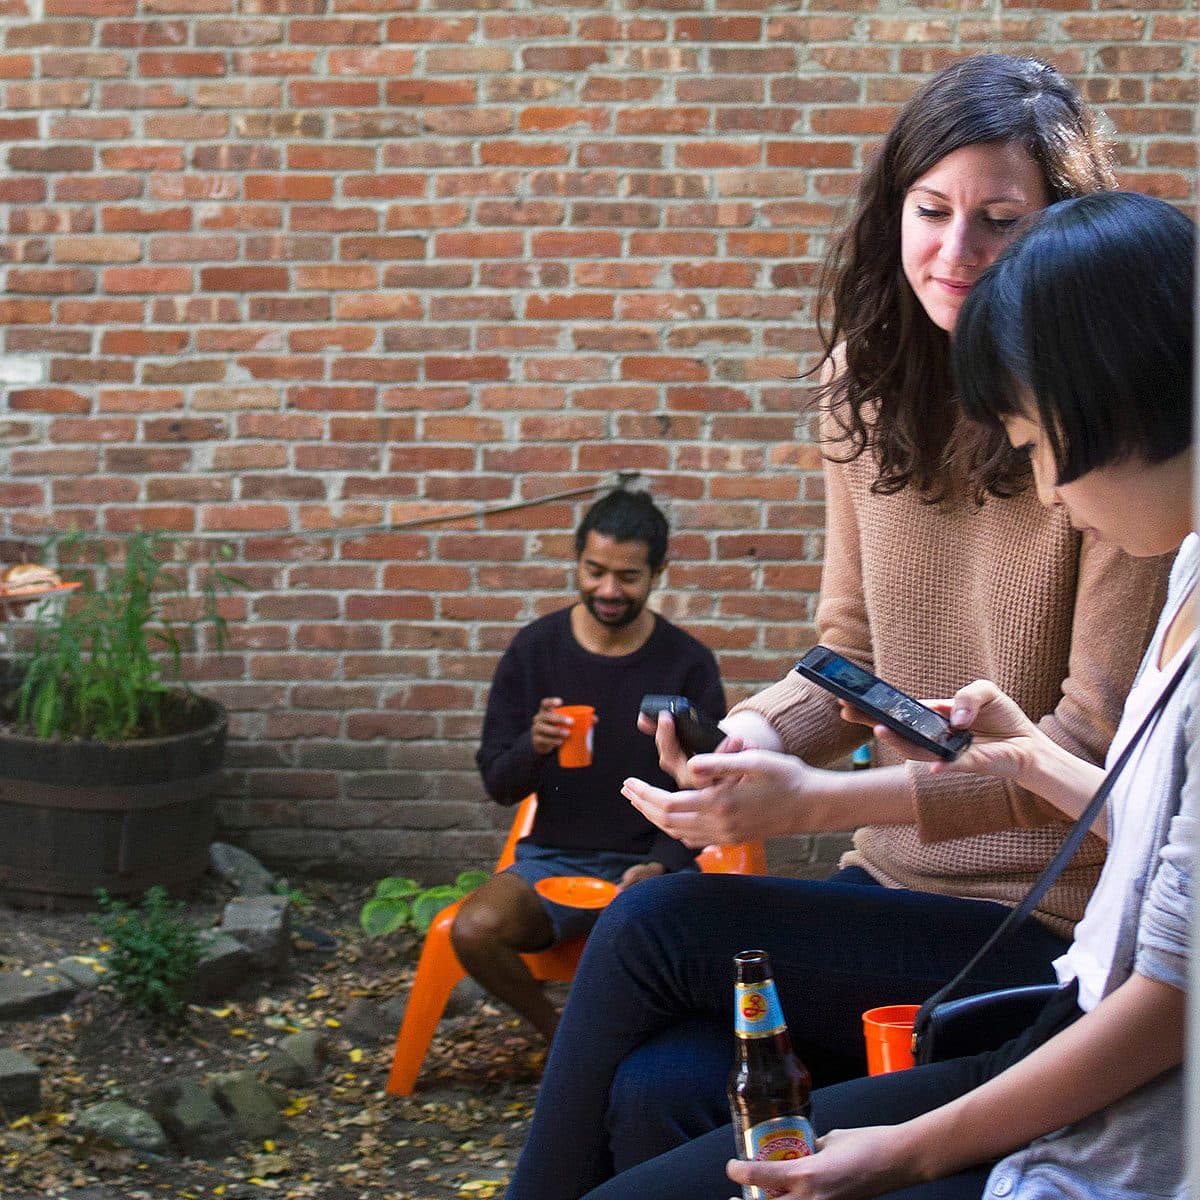 Four people are gathered in a small outdoor area with a brick wall. Two women in the foreground are looking at a phone, and one holds a beer. A man in the background is seated and holding an orange cup, while another man stands nearby with a plate of food.